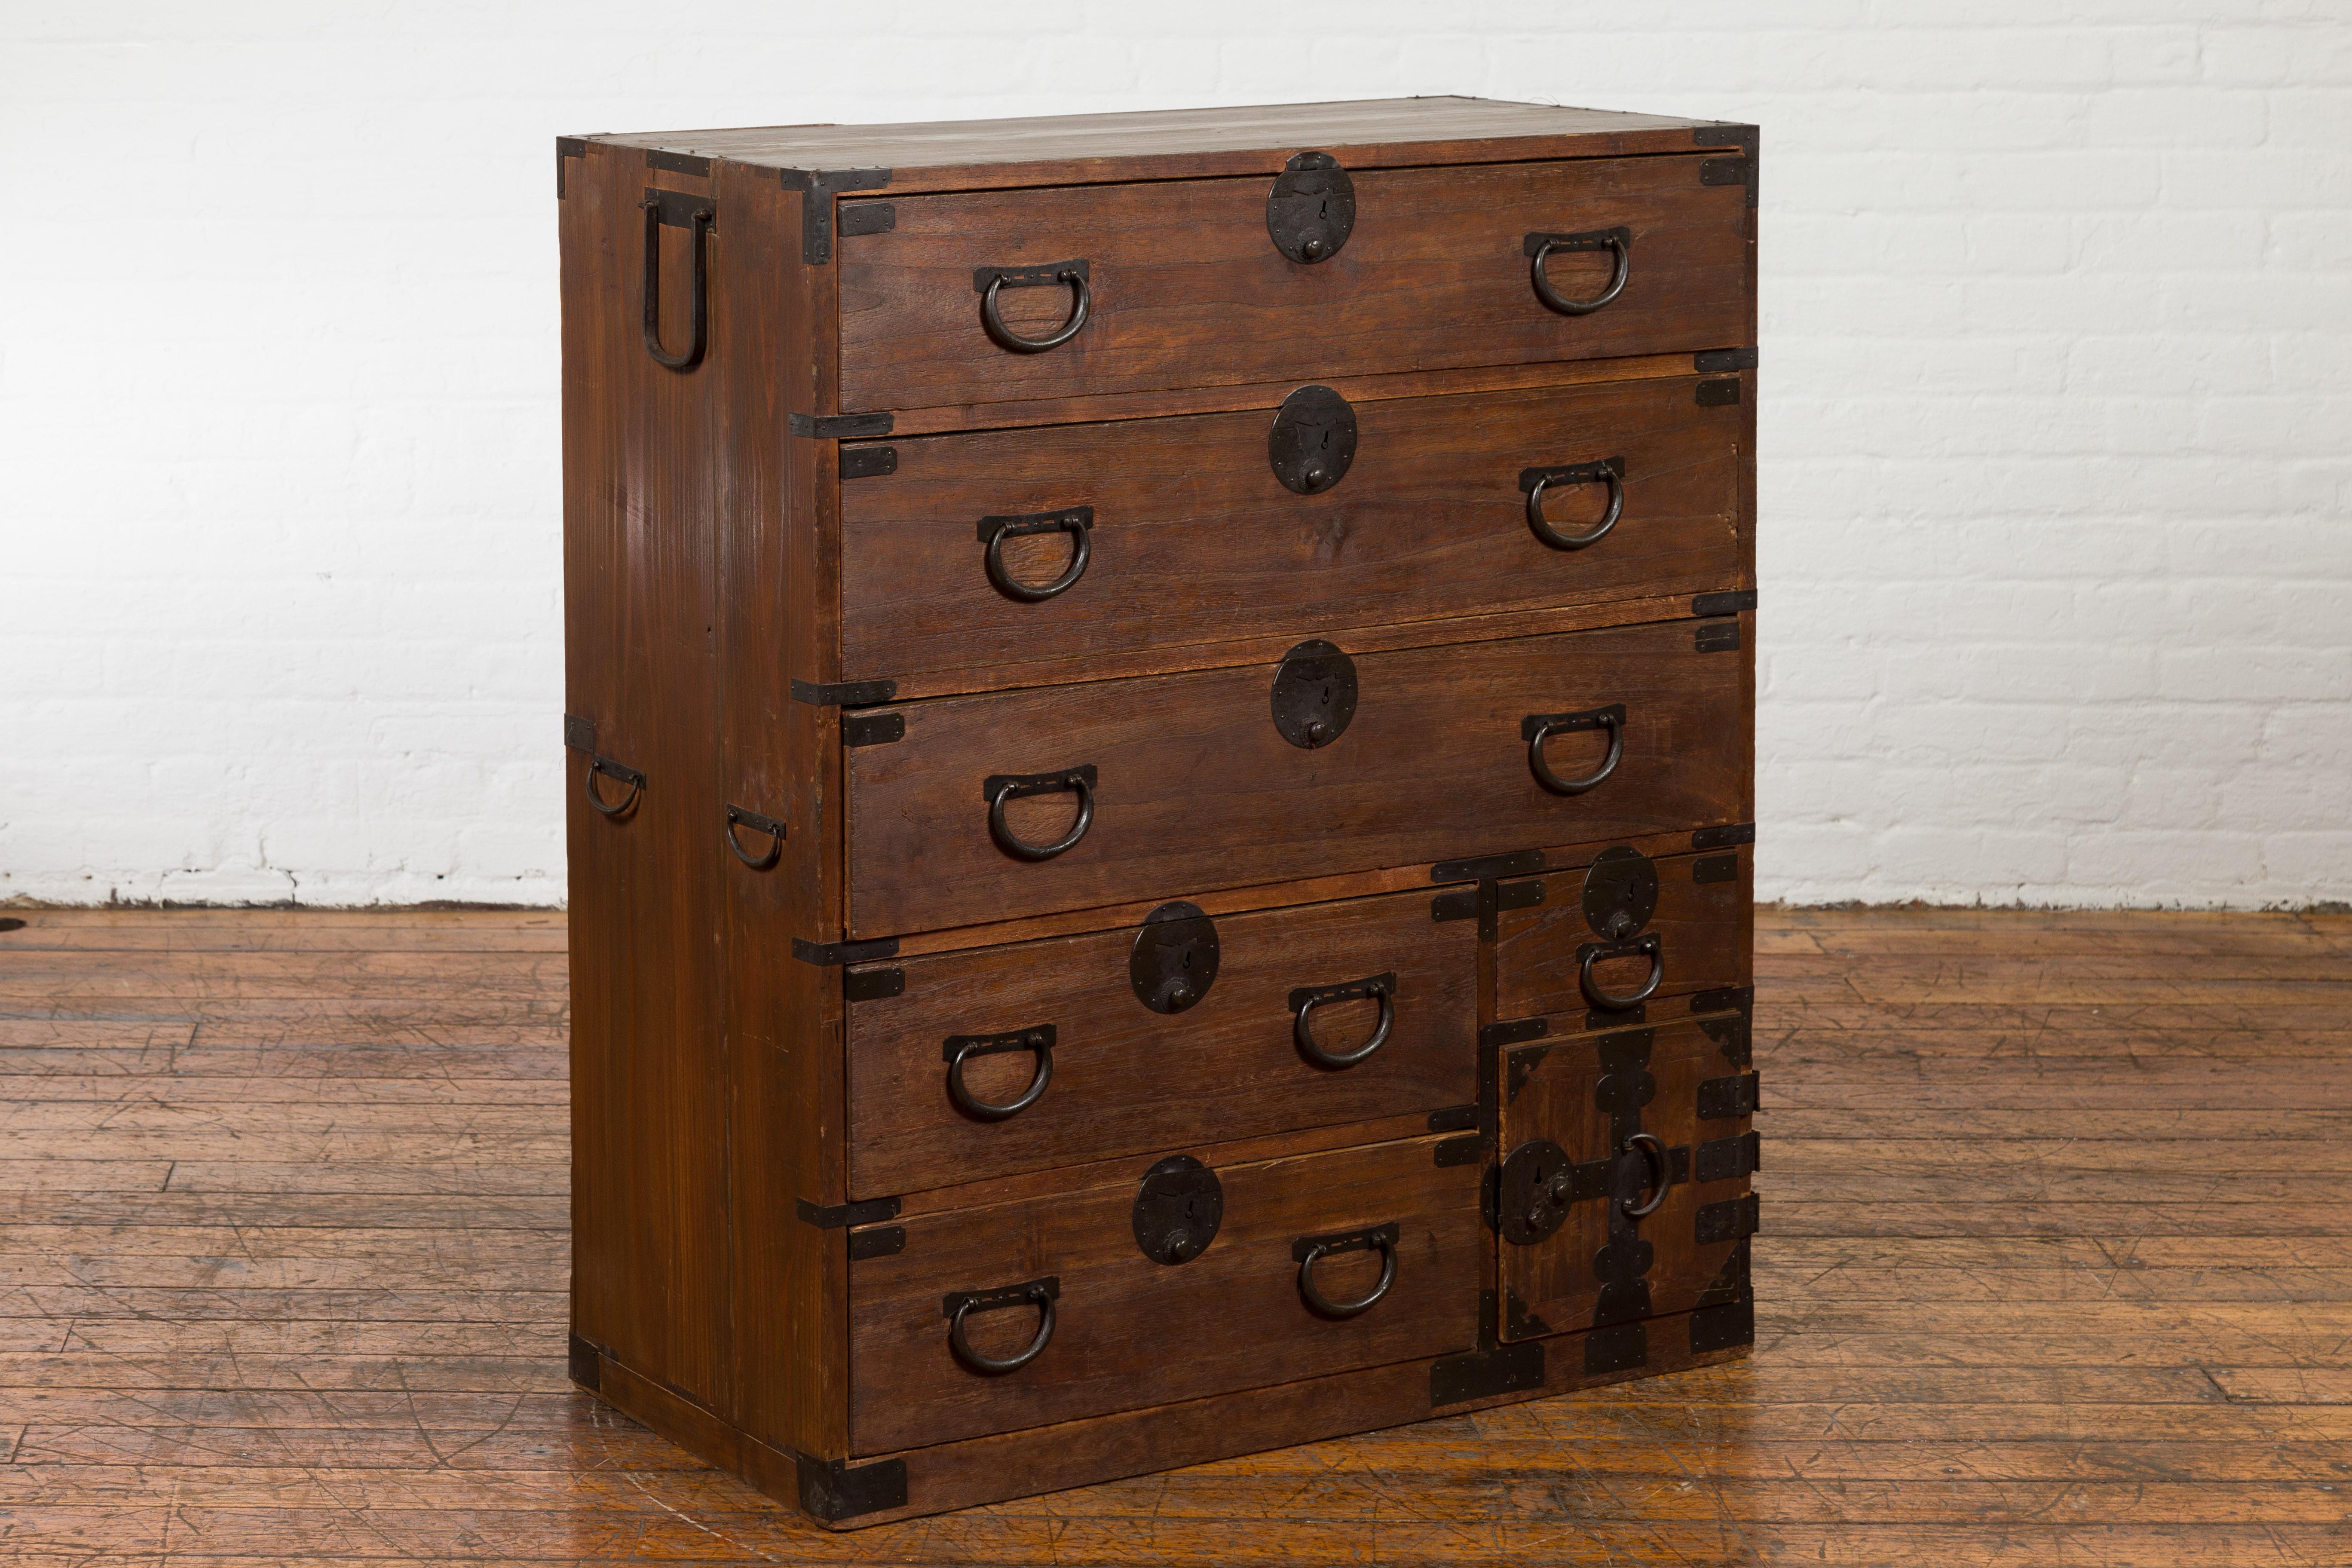 Japanese Taishō Tansu Chest in Isho-Dansu Style with Six Drawers and Safe In Good Condition For Sale In Yonkers, NY